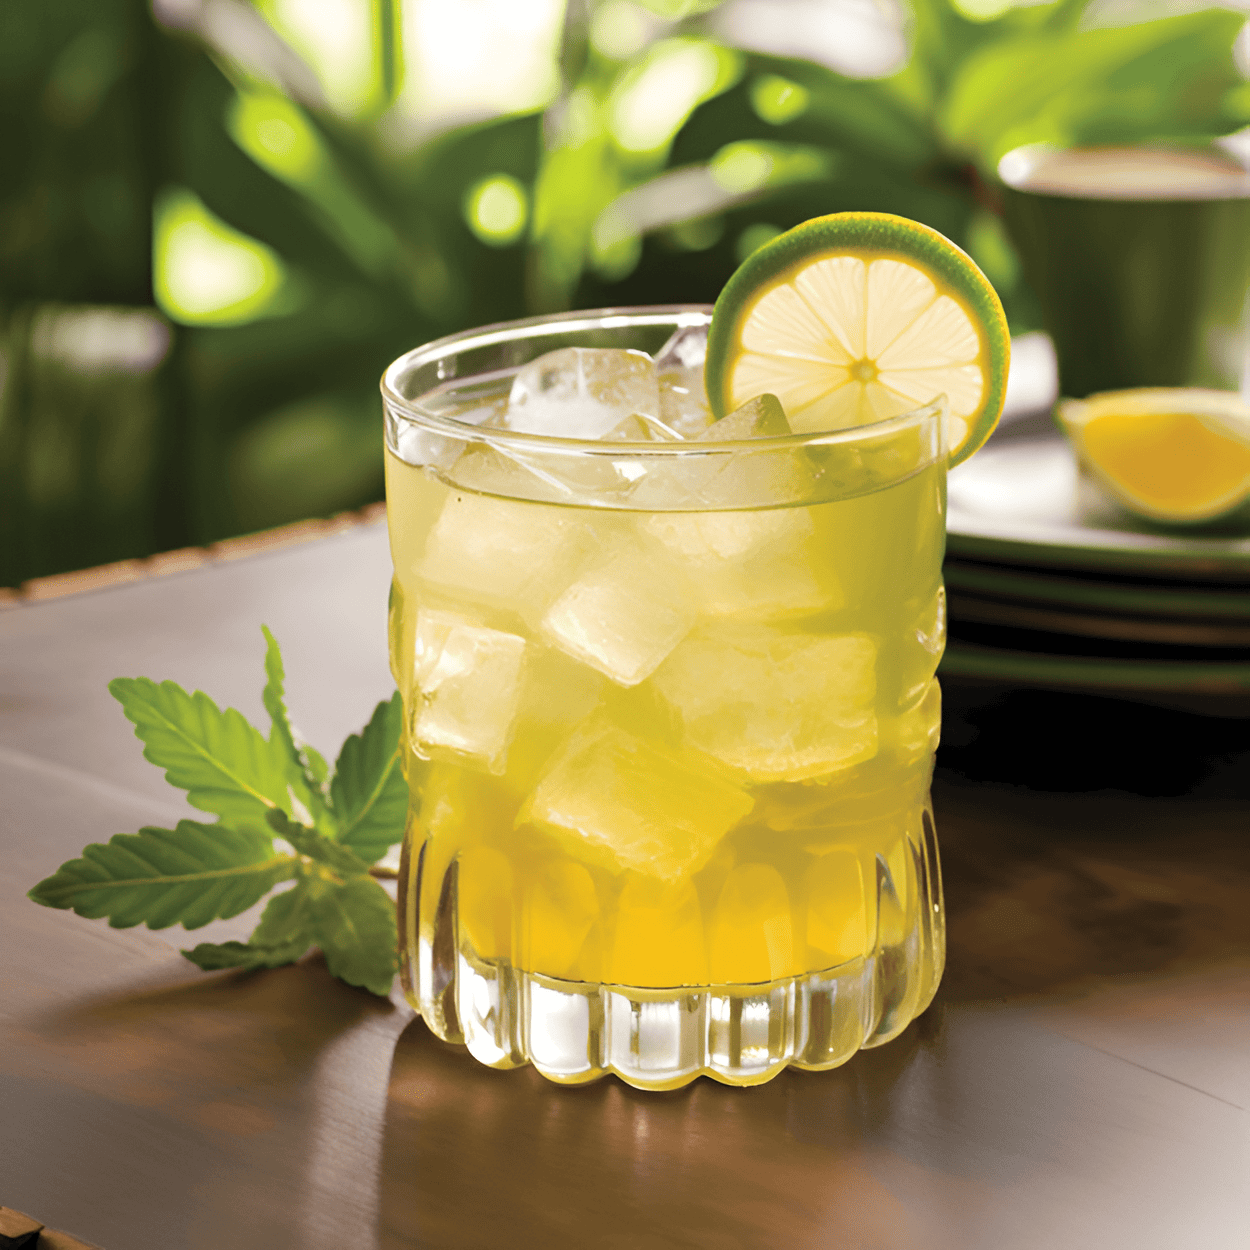 Whiskey Rickey Cocktail Recipe - The Whiskey Rickey is a refreshing, slightly tart, and subtly sweet cocktail. The whiskey provides a warm, robust base, while the lime juice adds a zesty citrus note. The club soda gives it a light, effervescent finish.